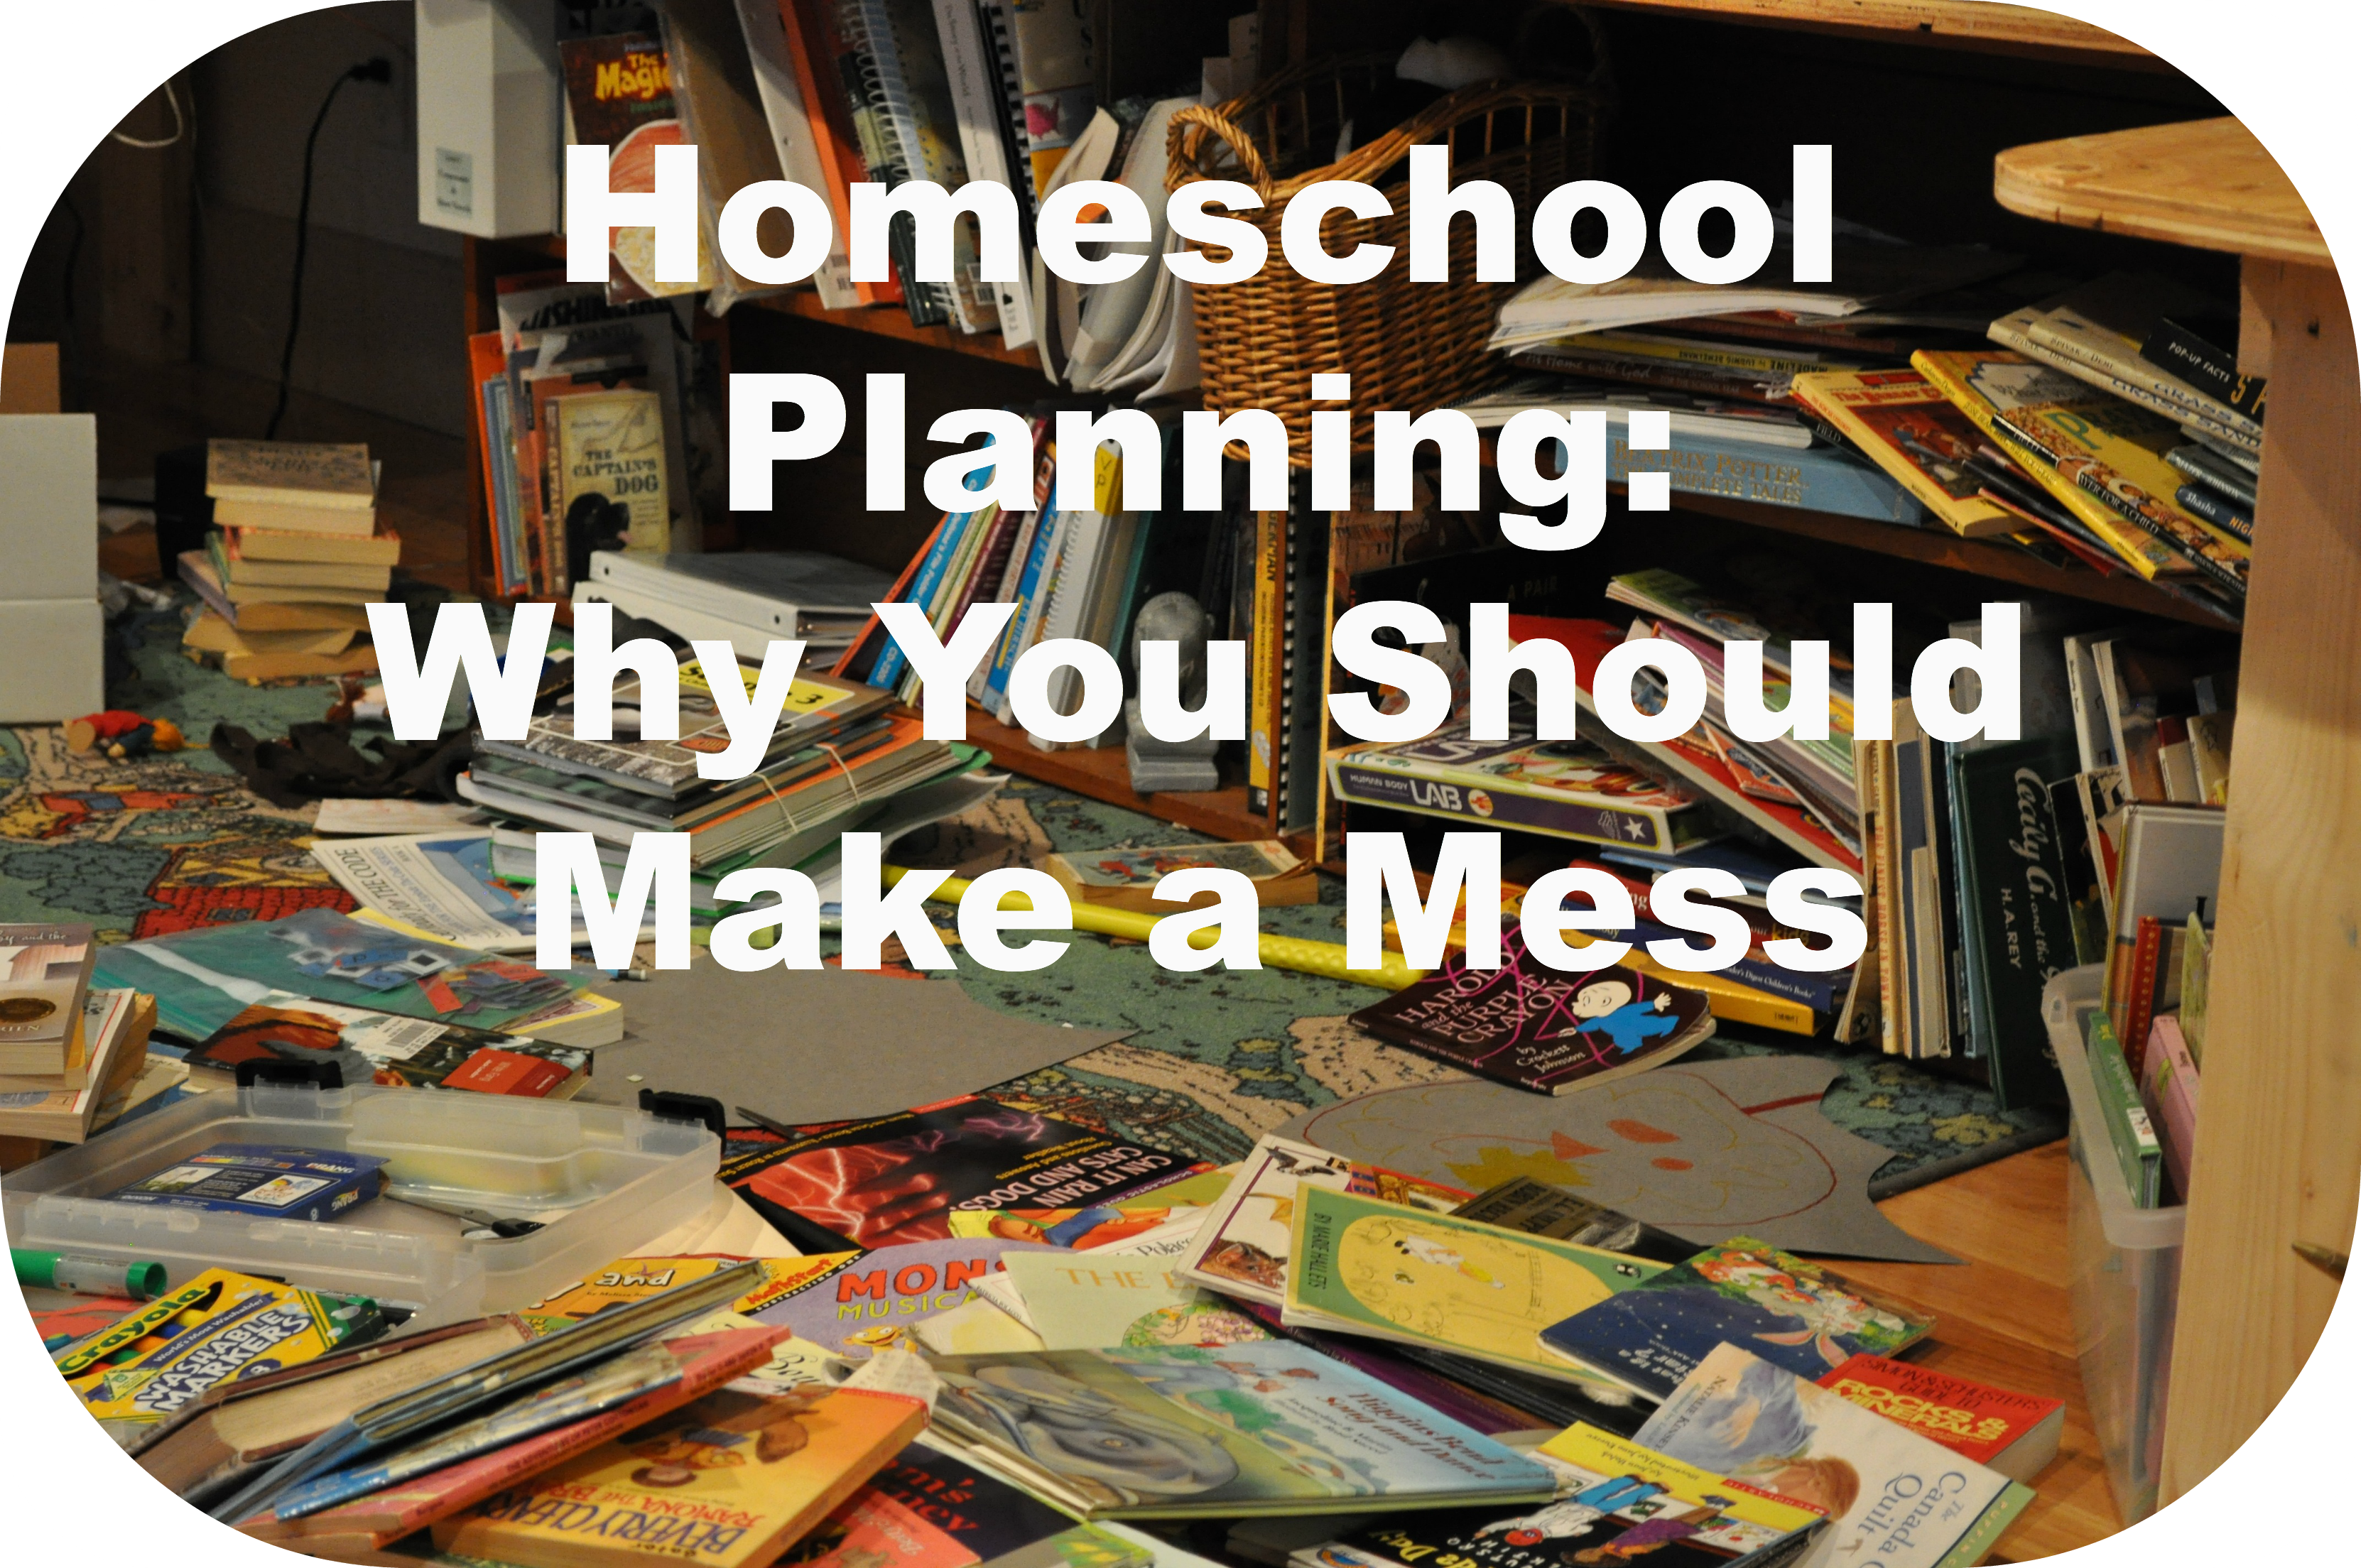 Homeschool Planning: Why You Should Make a Mess